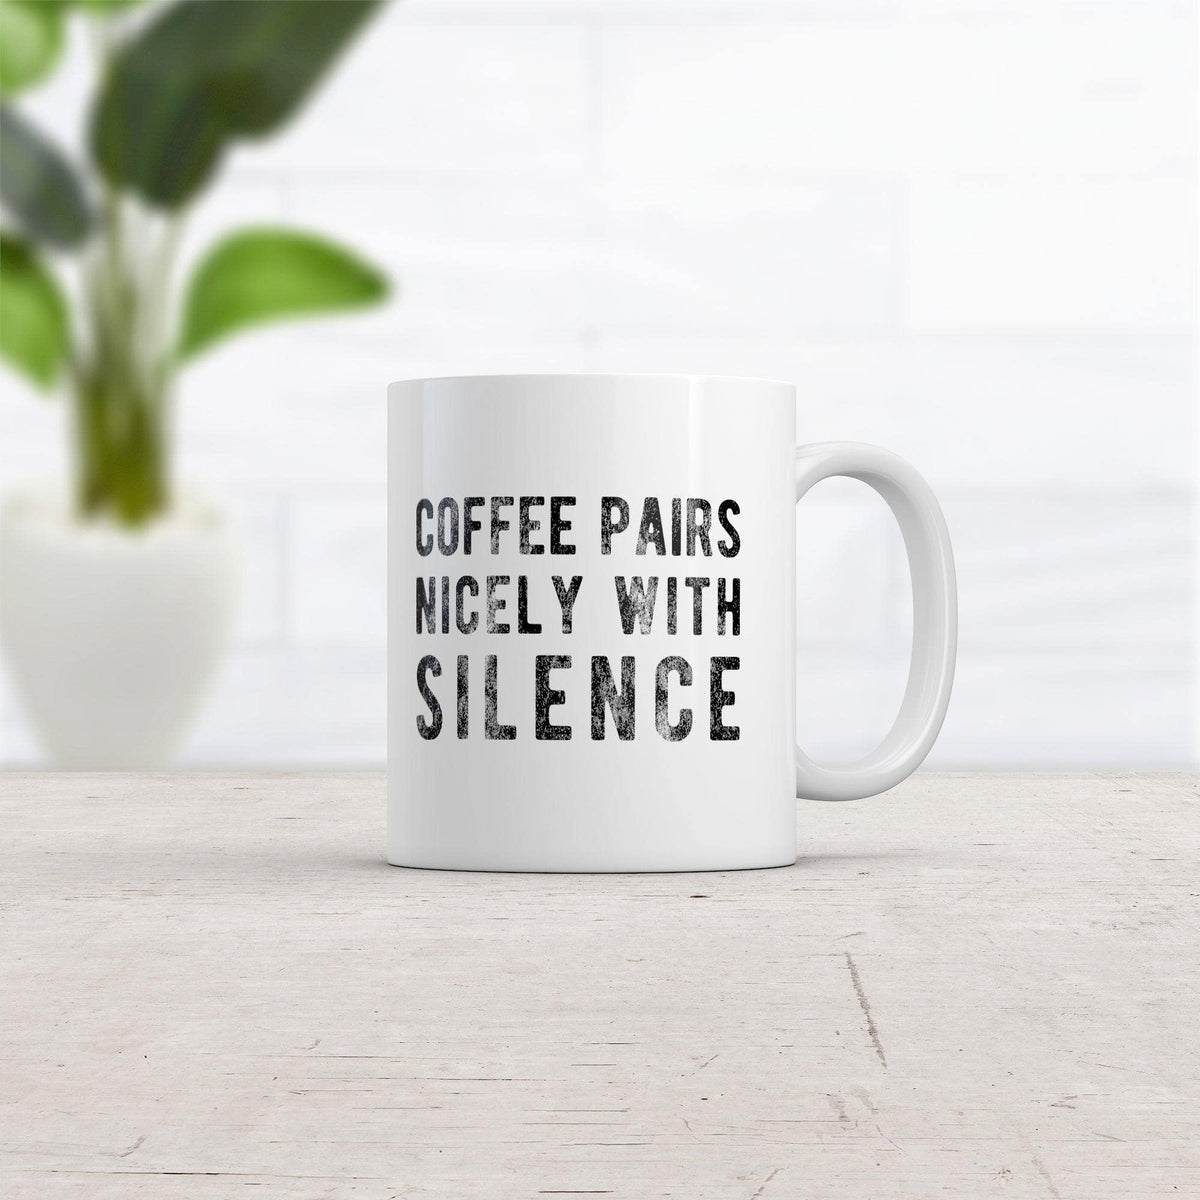 Coffee Pairs Nicely With Silence Mug Funny Sarcastic Peace and Quiet Caffeine Lovers Novelty Cup-11oz  -  Crazy Dog T-Shirts